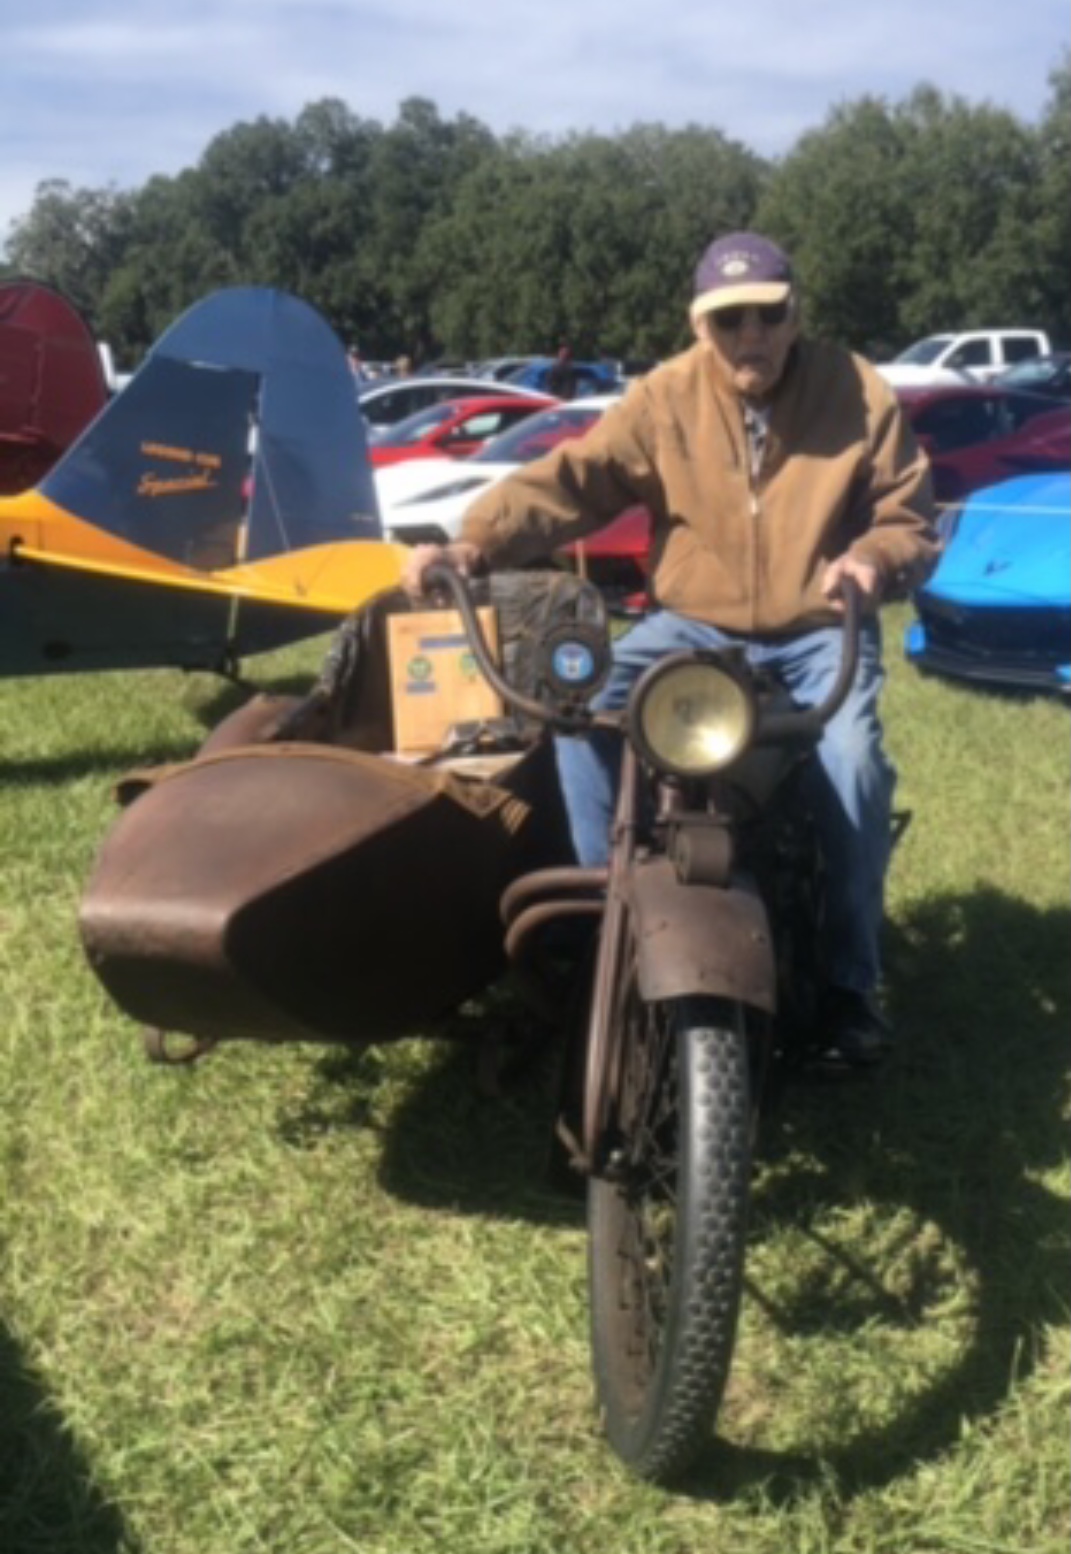 Hank (almost 100 years old) sitting on Kevin Oliver’s almost 100 year old Indian PowerPlus with Sidecar